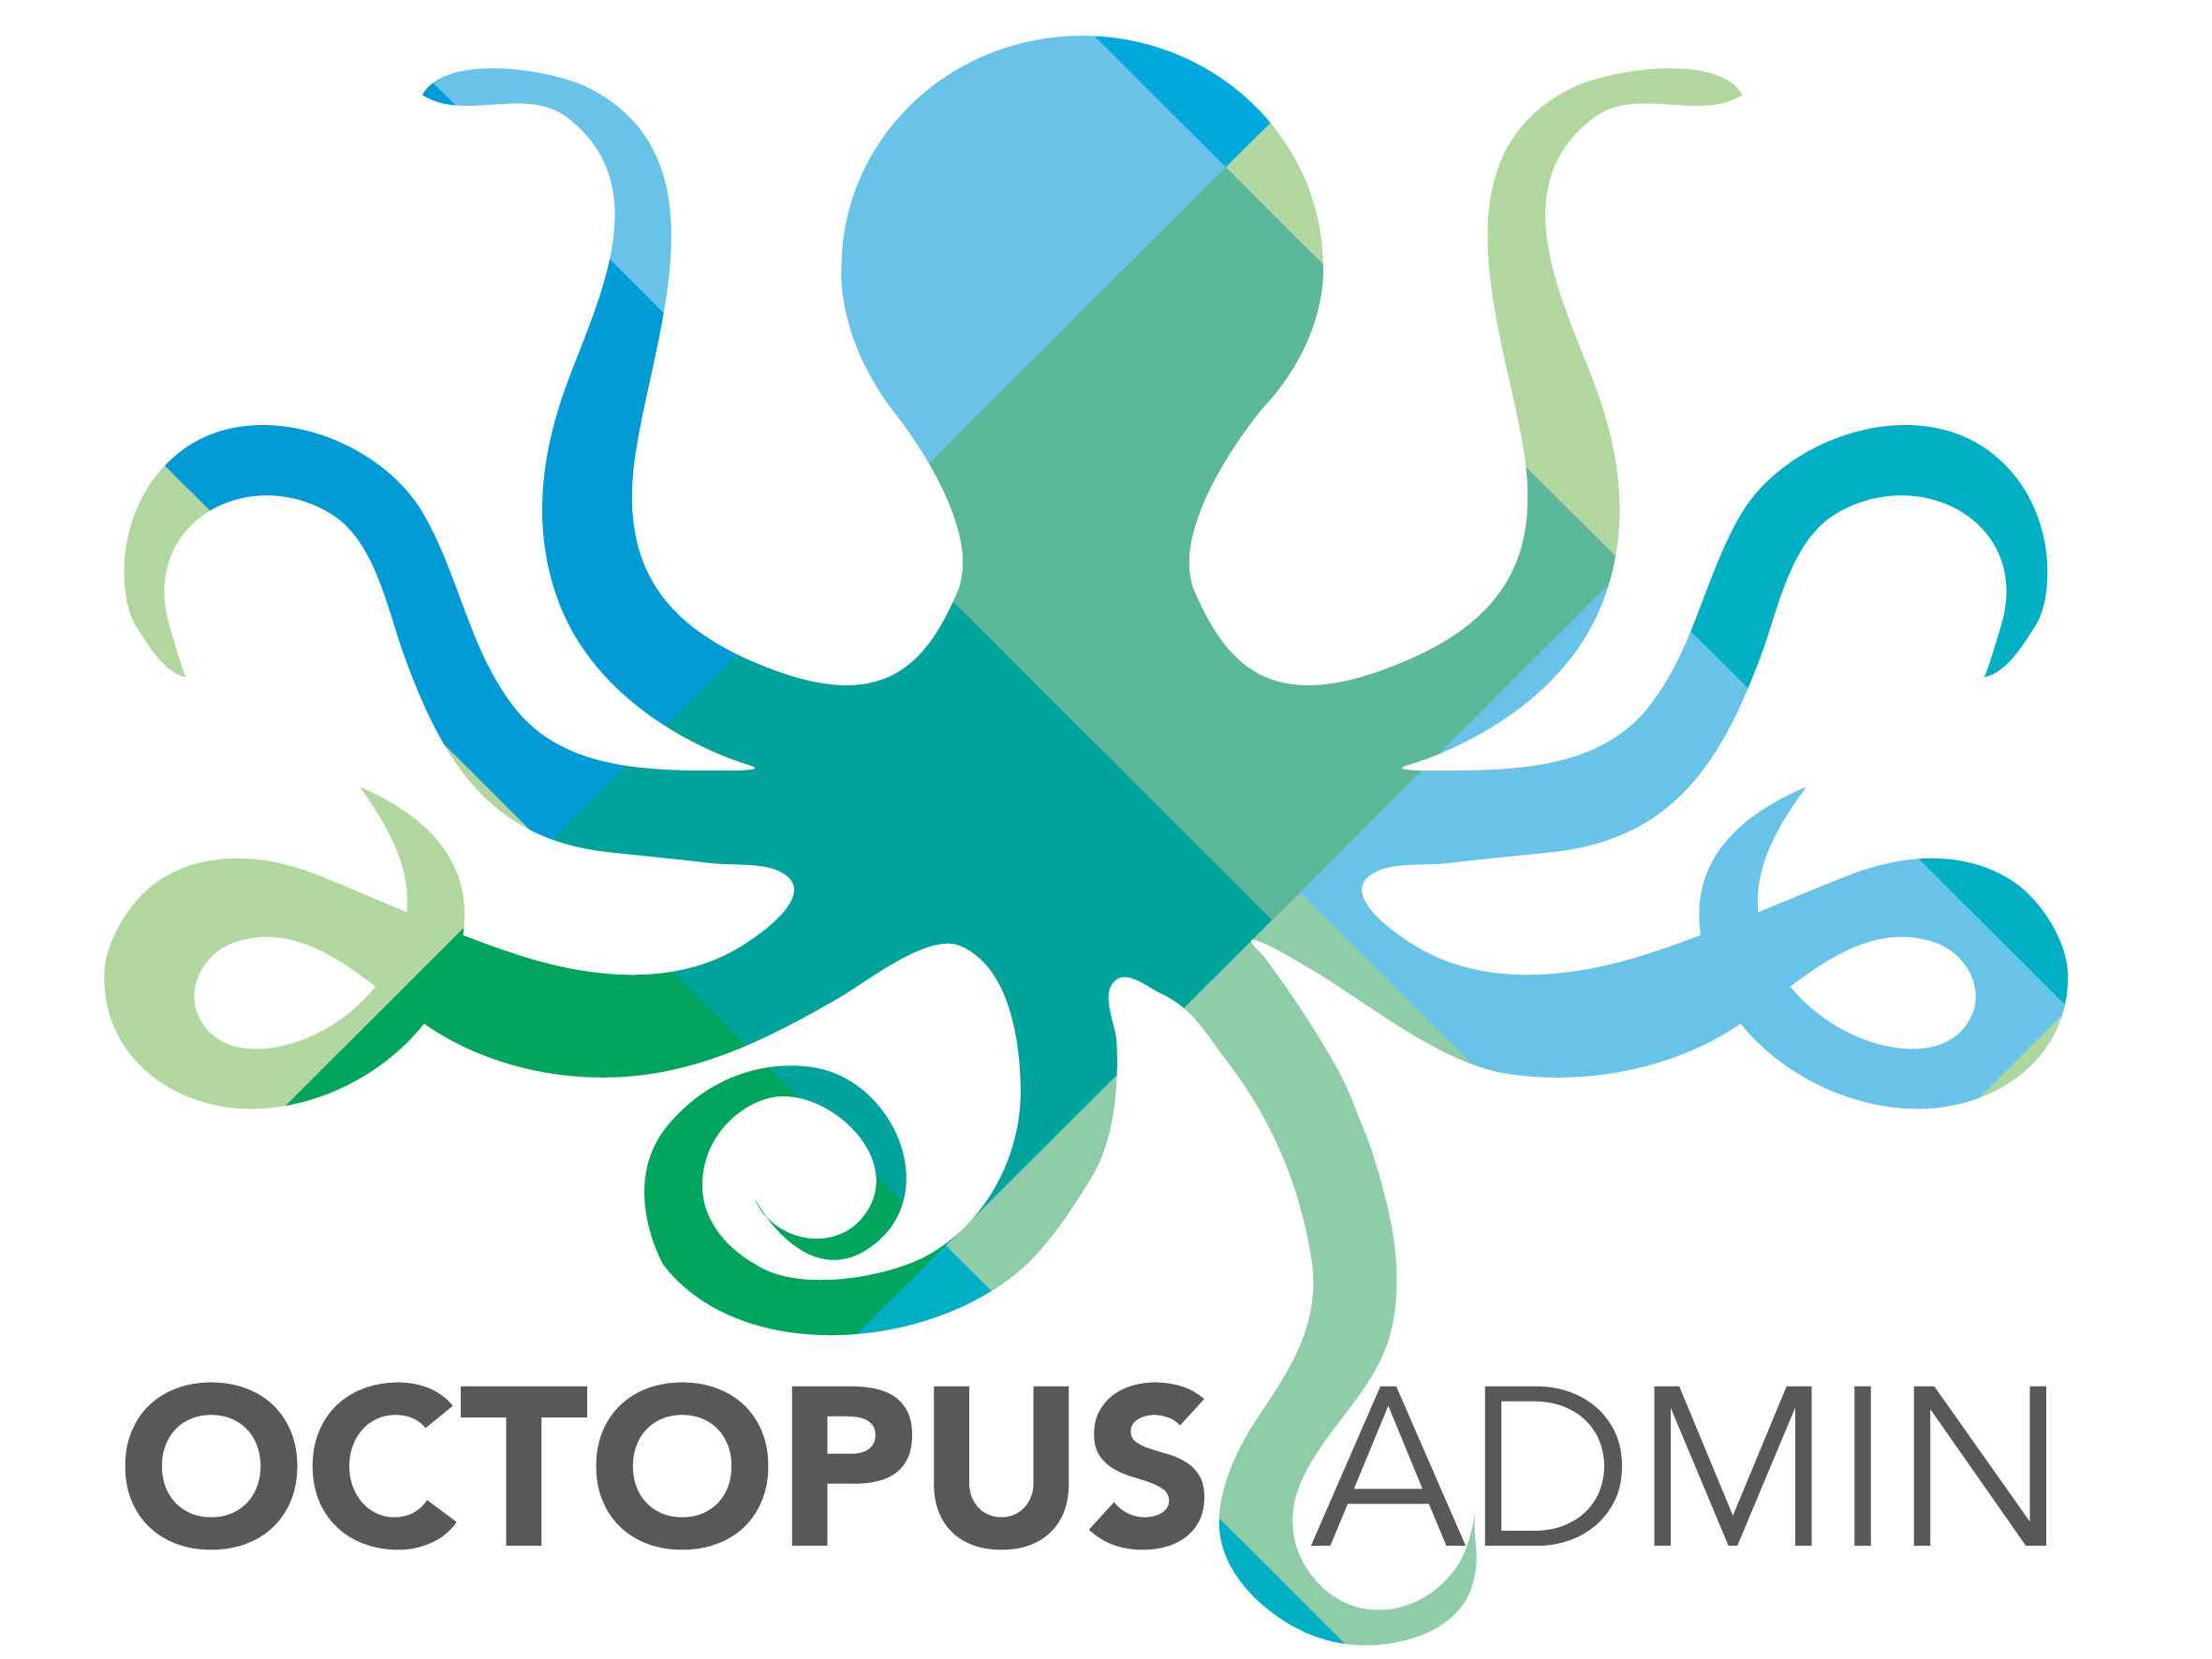 Octopus Admin – Virtual Business Support – Business Search NZ